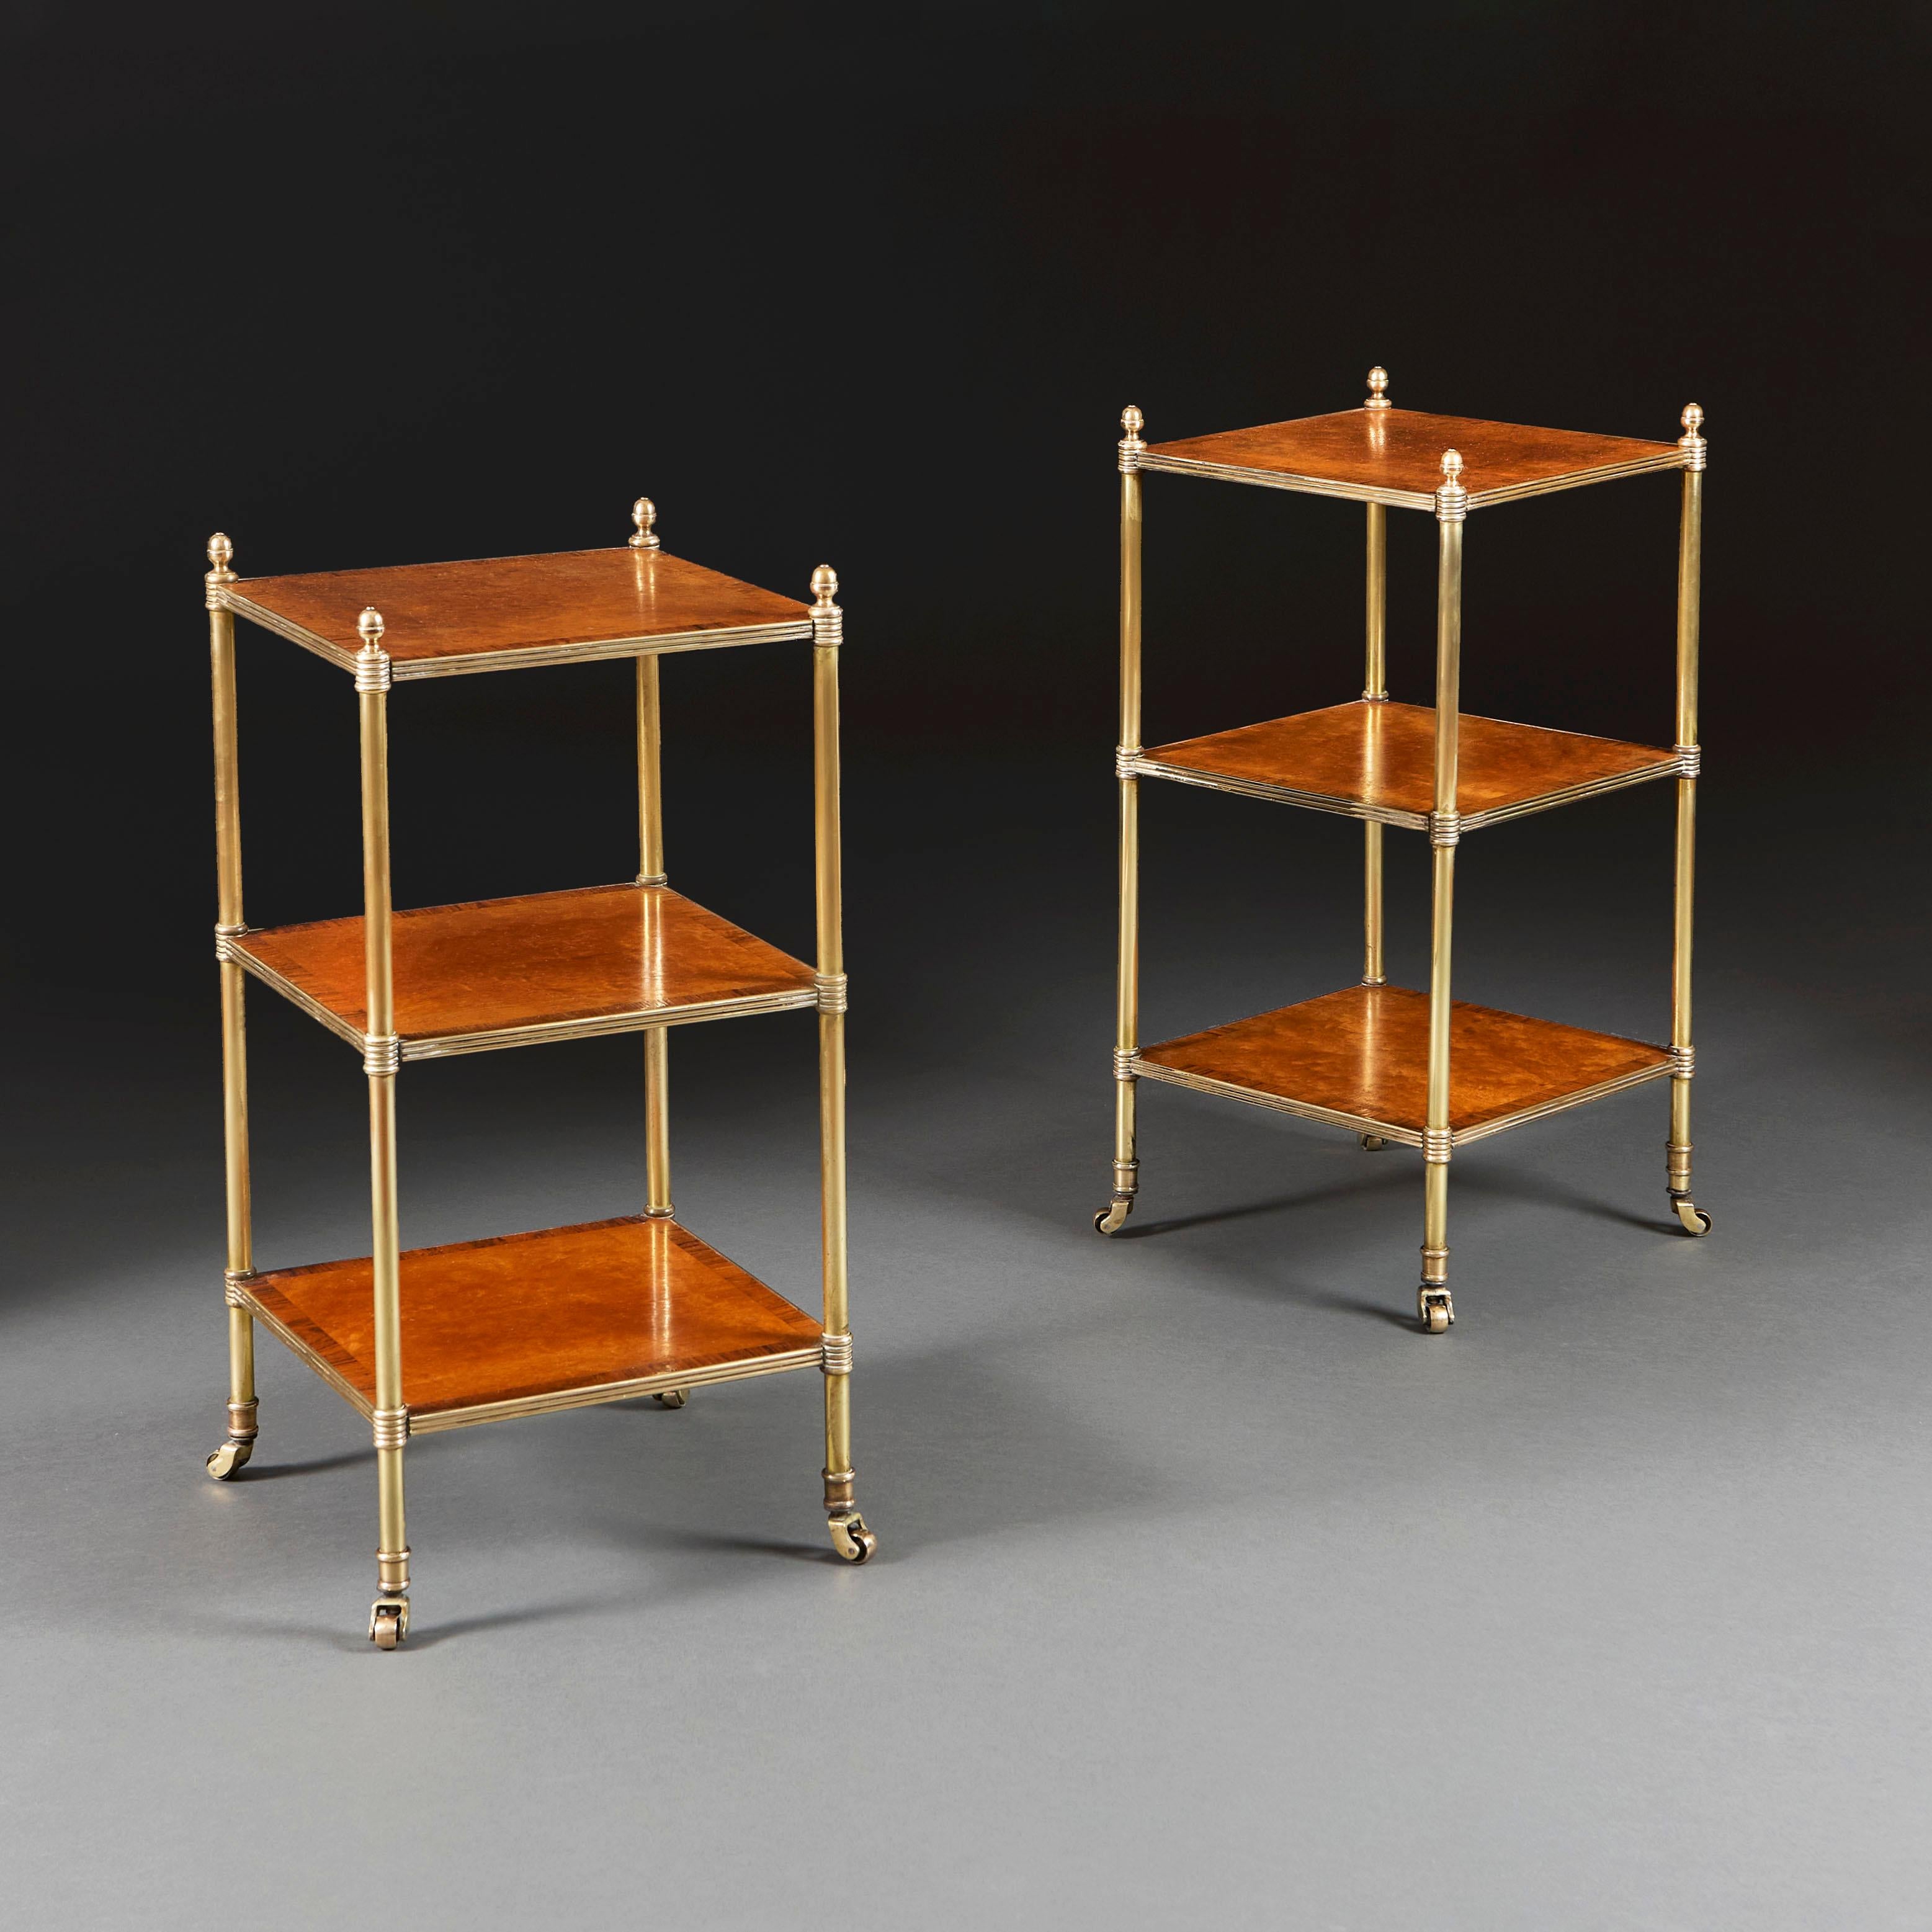 England, circa 1900

A pair of Edwardian three tier etageres, the satinwood surfaces with crossbanded borders, with brass uprights surmounted by acorn finials, and terminating in brass castors.

Height 66.00cm
Width 31.00cm
Depth 31.00cm